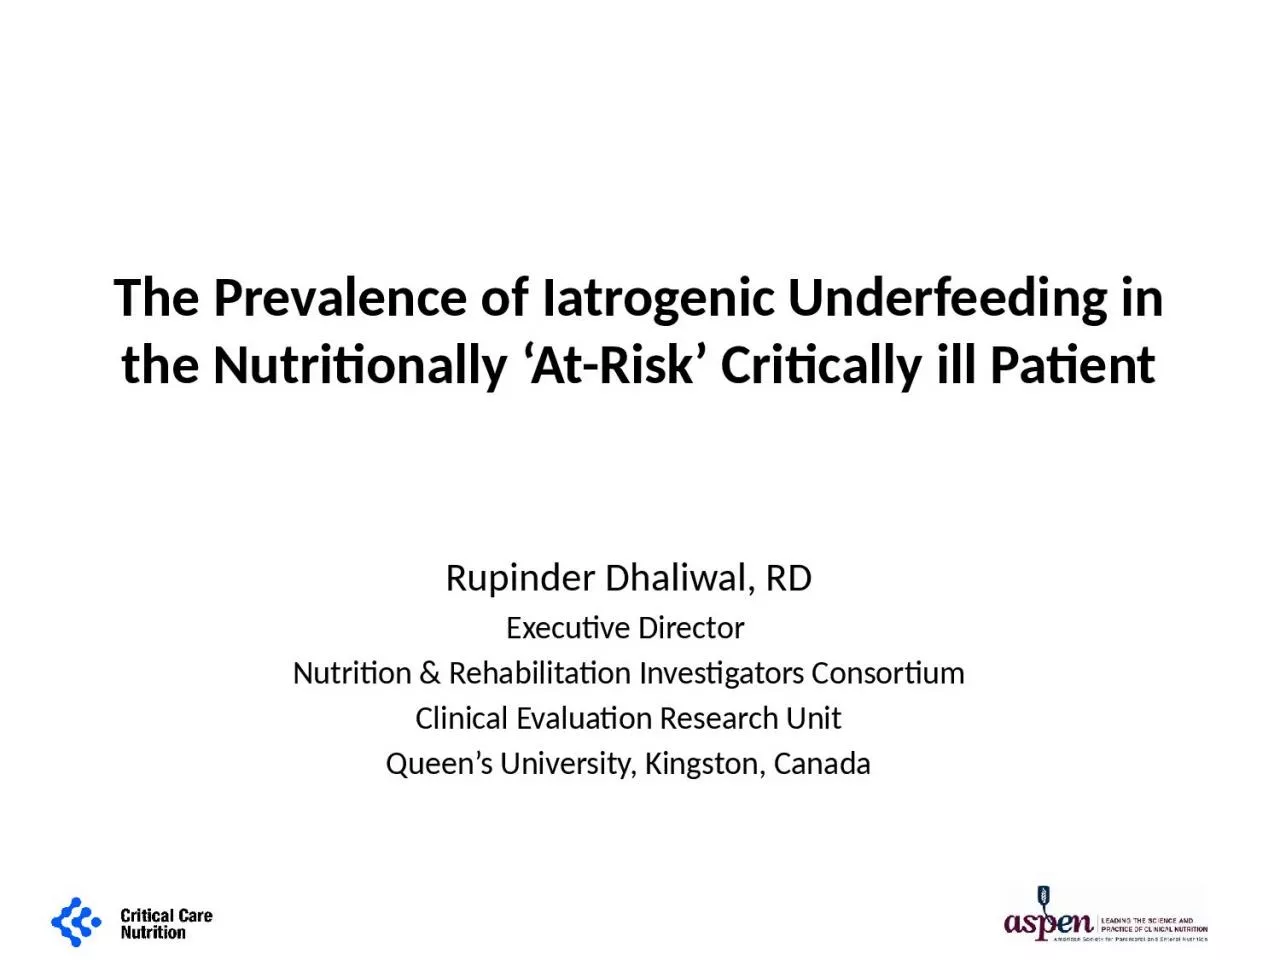 The Prevalence of Iatrogenic Underfeeding in the Nutritionally ‘At-Risk’ Critically